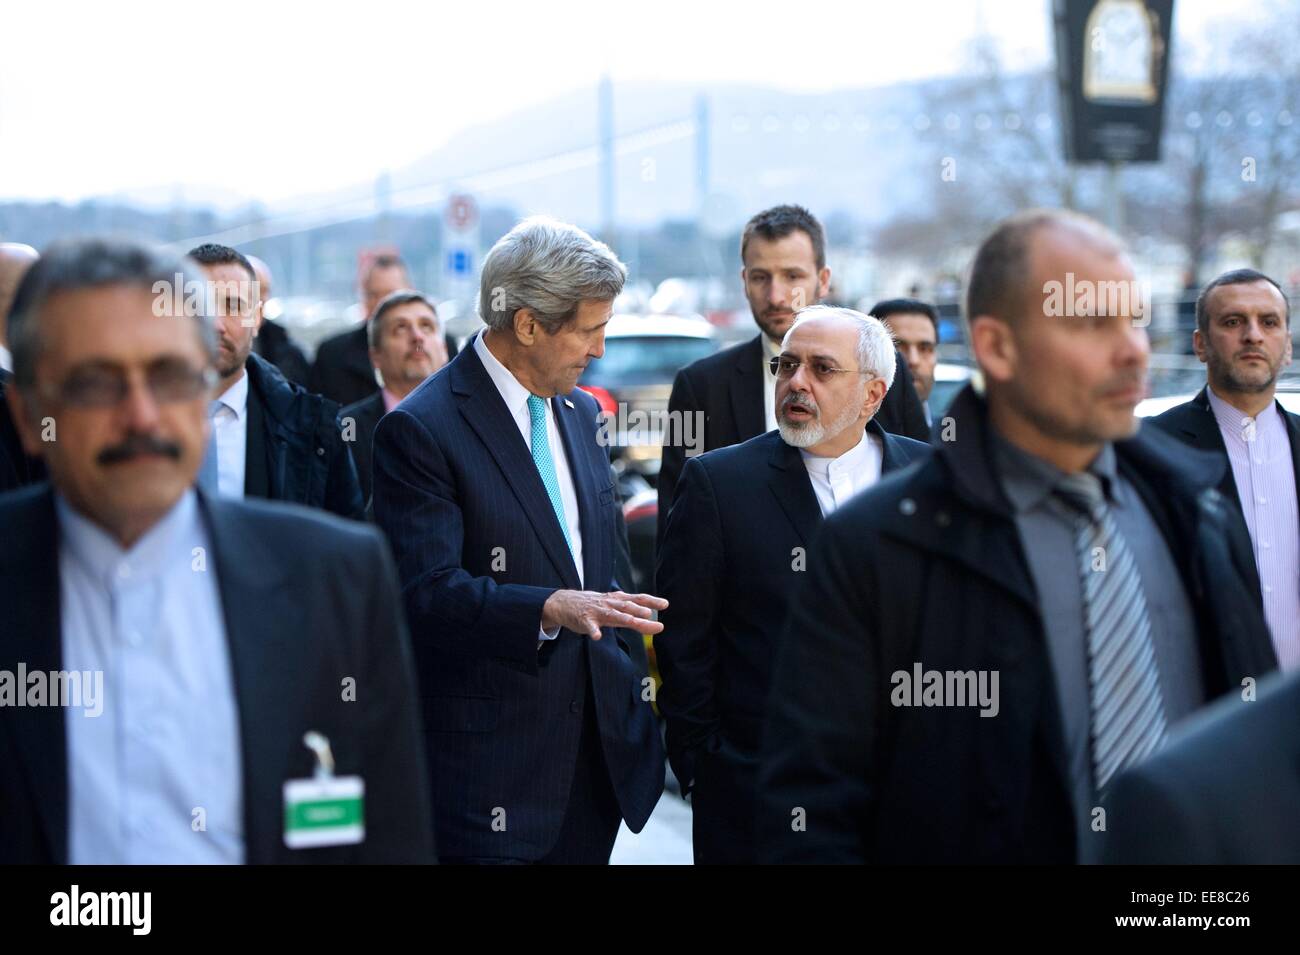 US Secretary of State John Kerry walks with Iranian Foreign Minister Zarif during a break in negotiations about the future of Iran's nuclear program January 14, 2014 in Geneva, Switzerland. Stock Photo